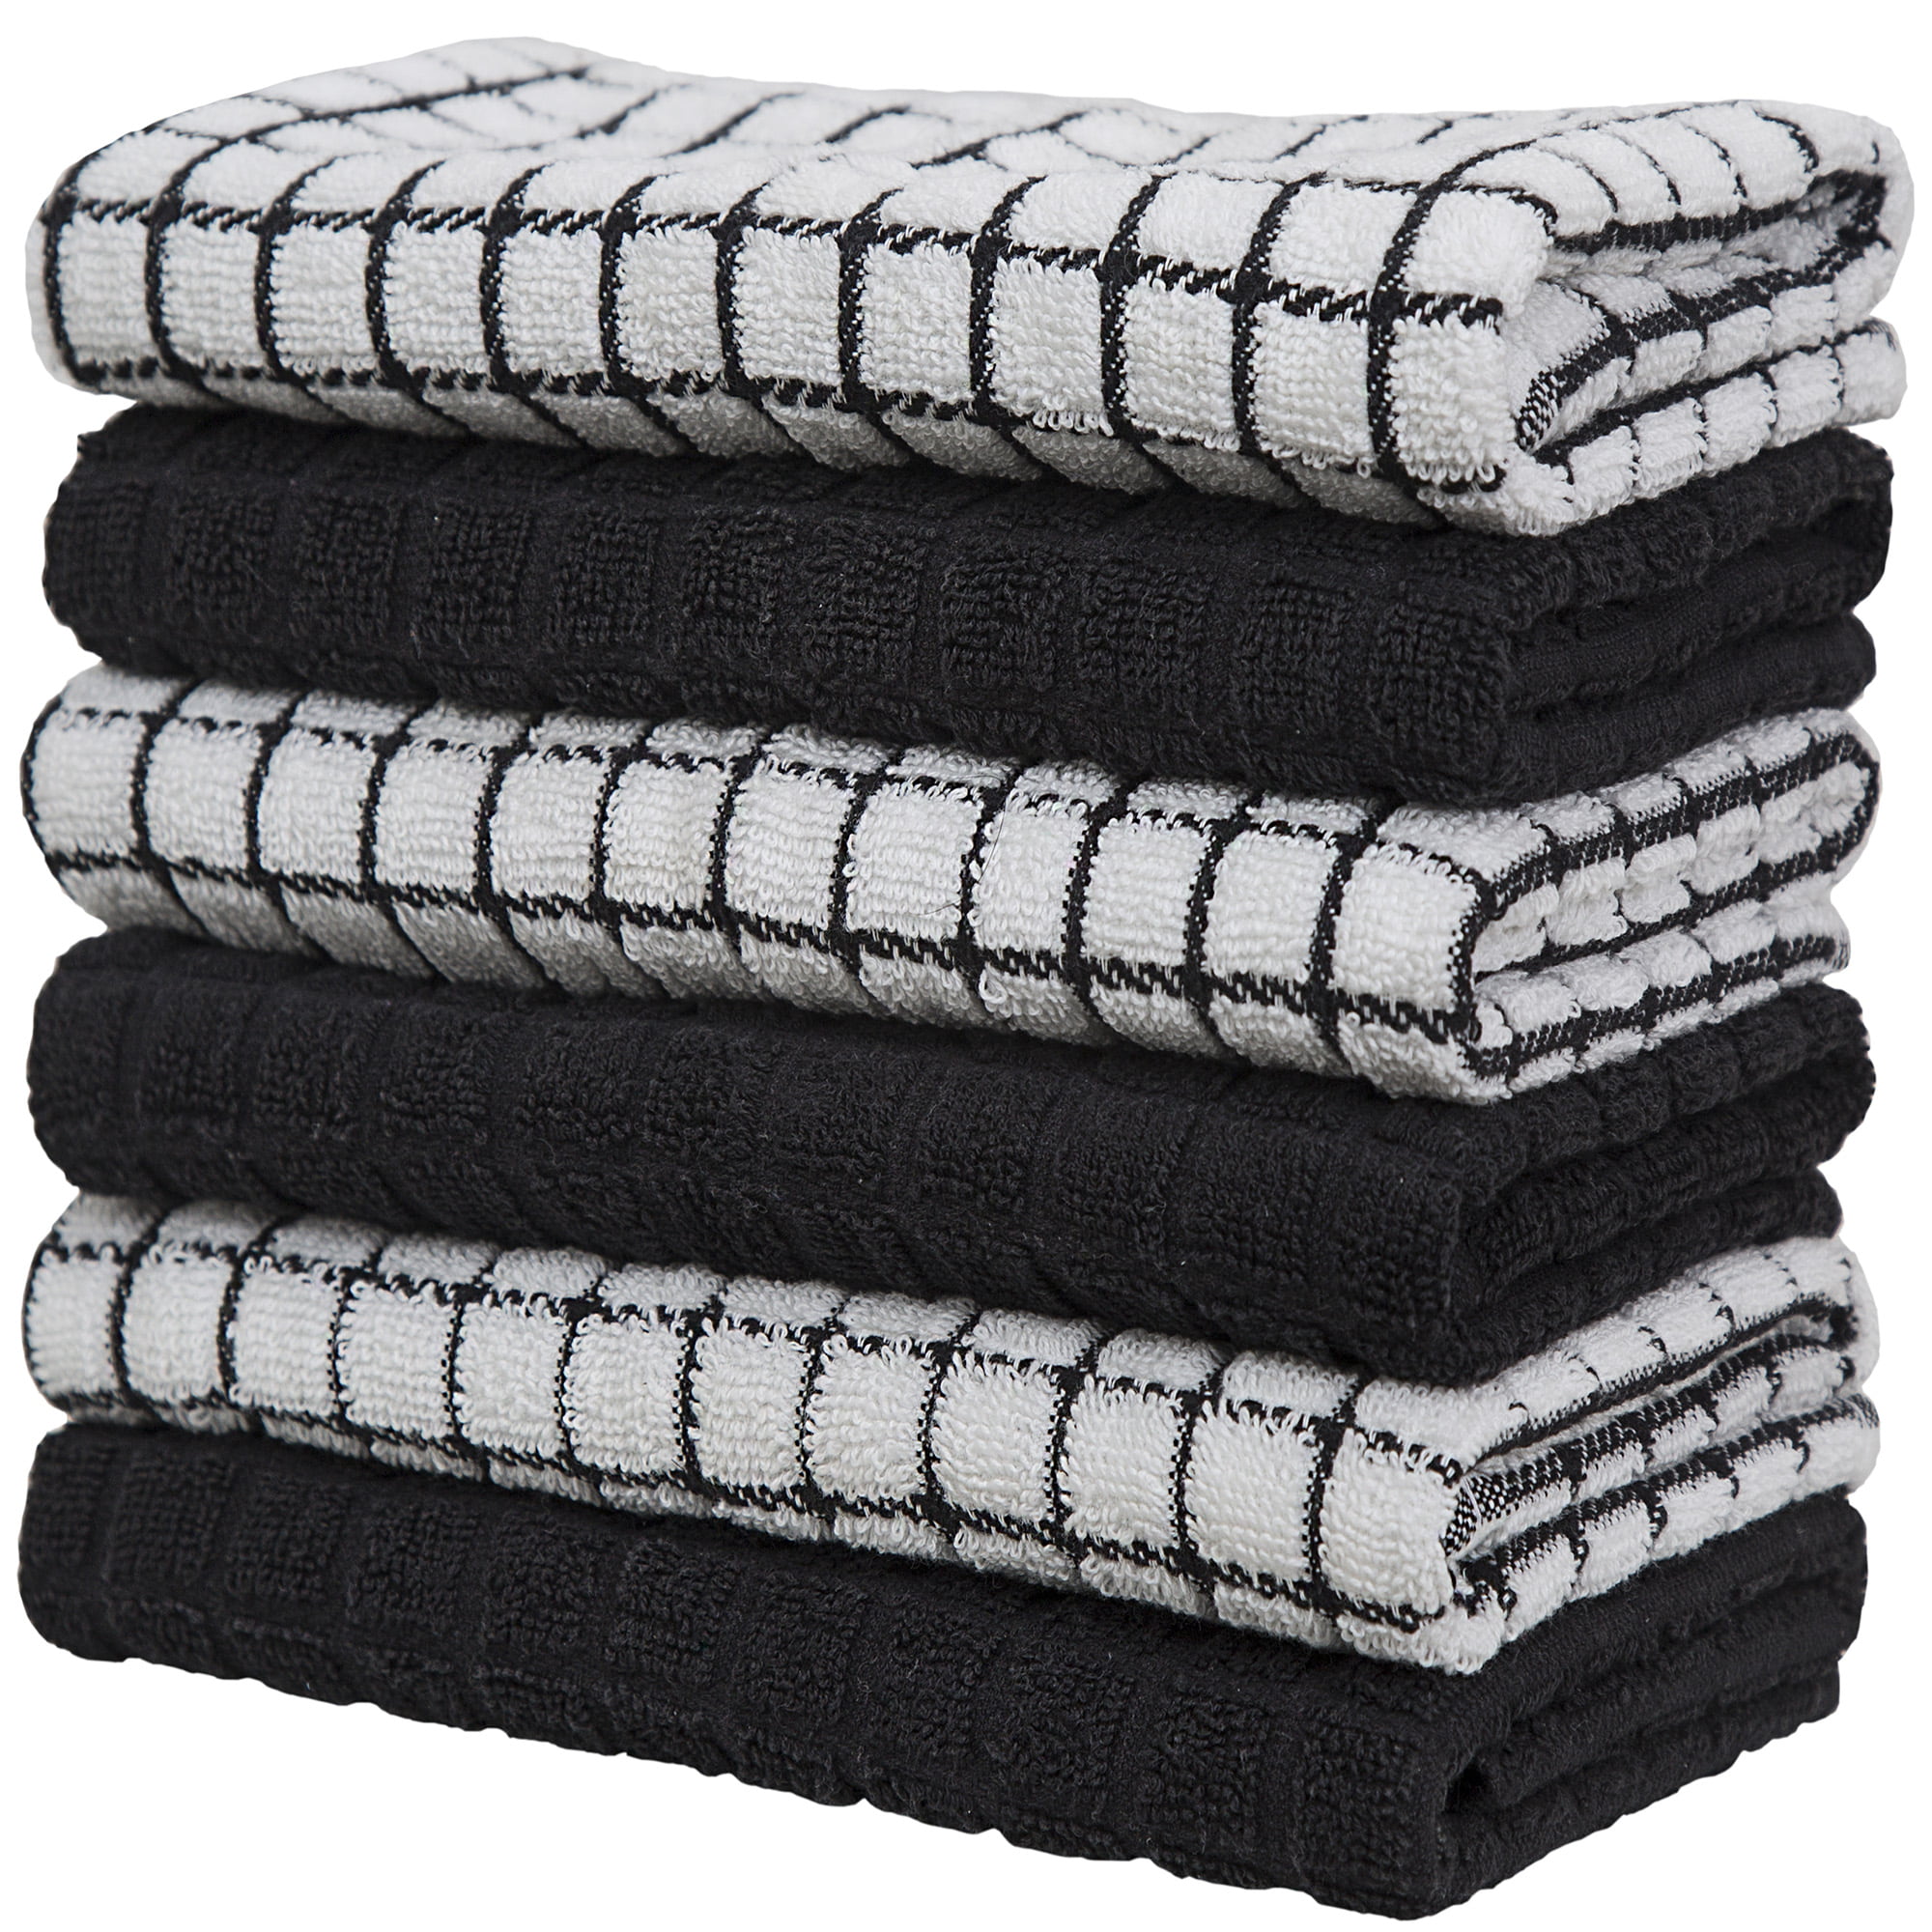 XLNT Black Large Kitchen Towels (2 Pack) - 100% Cotton Dish Towels | 20 x  28 | Ultra Absorbent Dishcloths Sets of Hand Towels/Tea Towels for